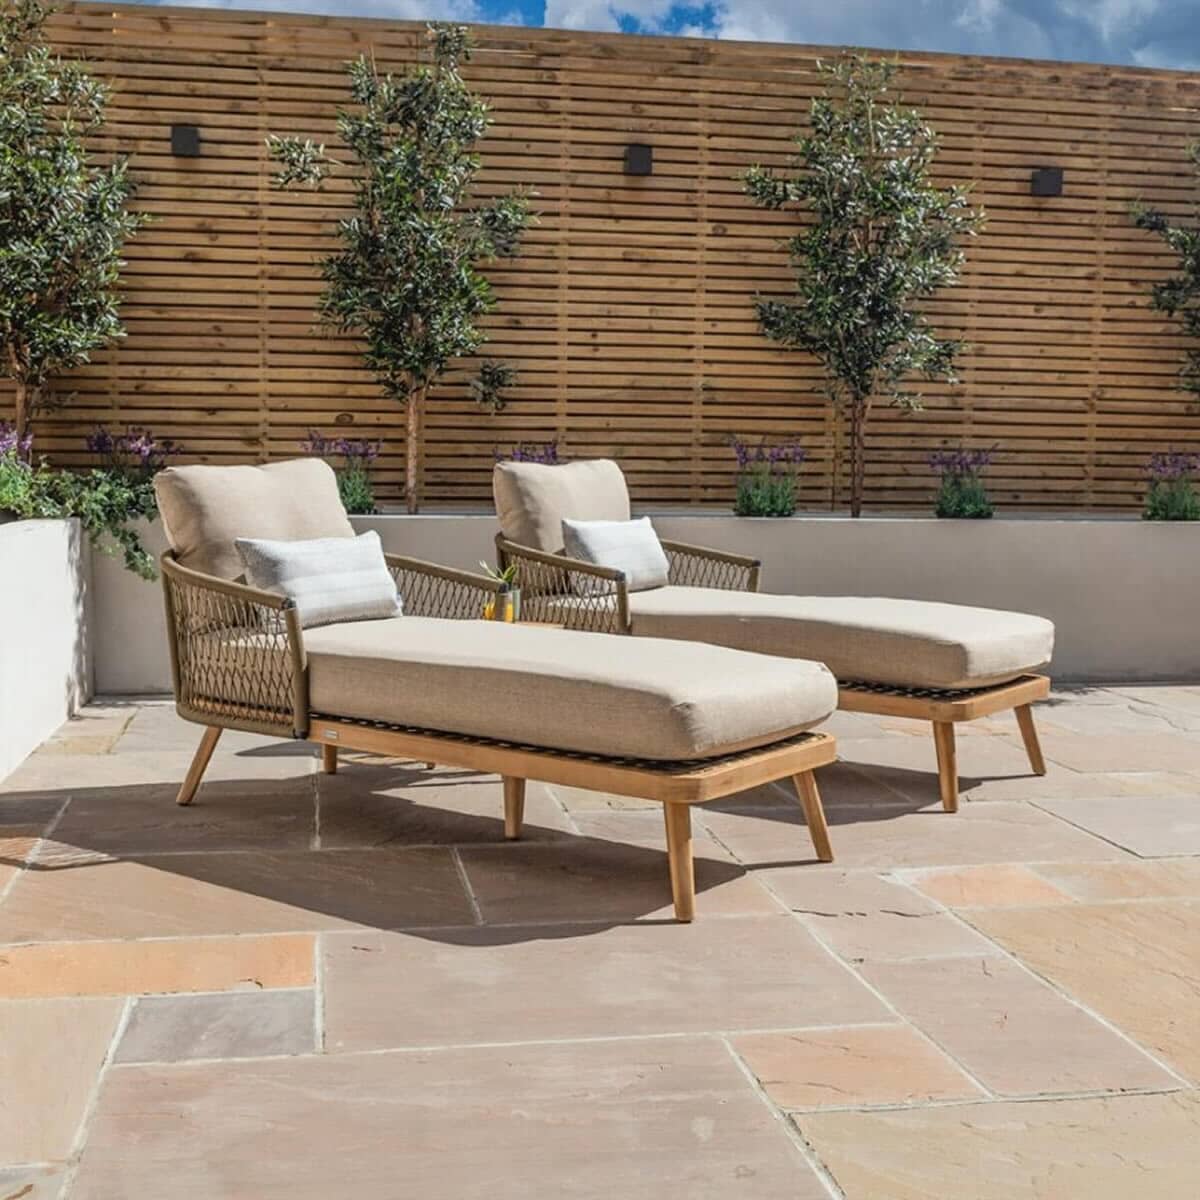 Maze Bali Double Sunlounger Set with Side Table Sandstone